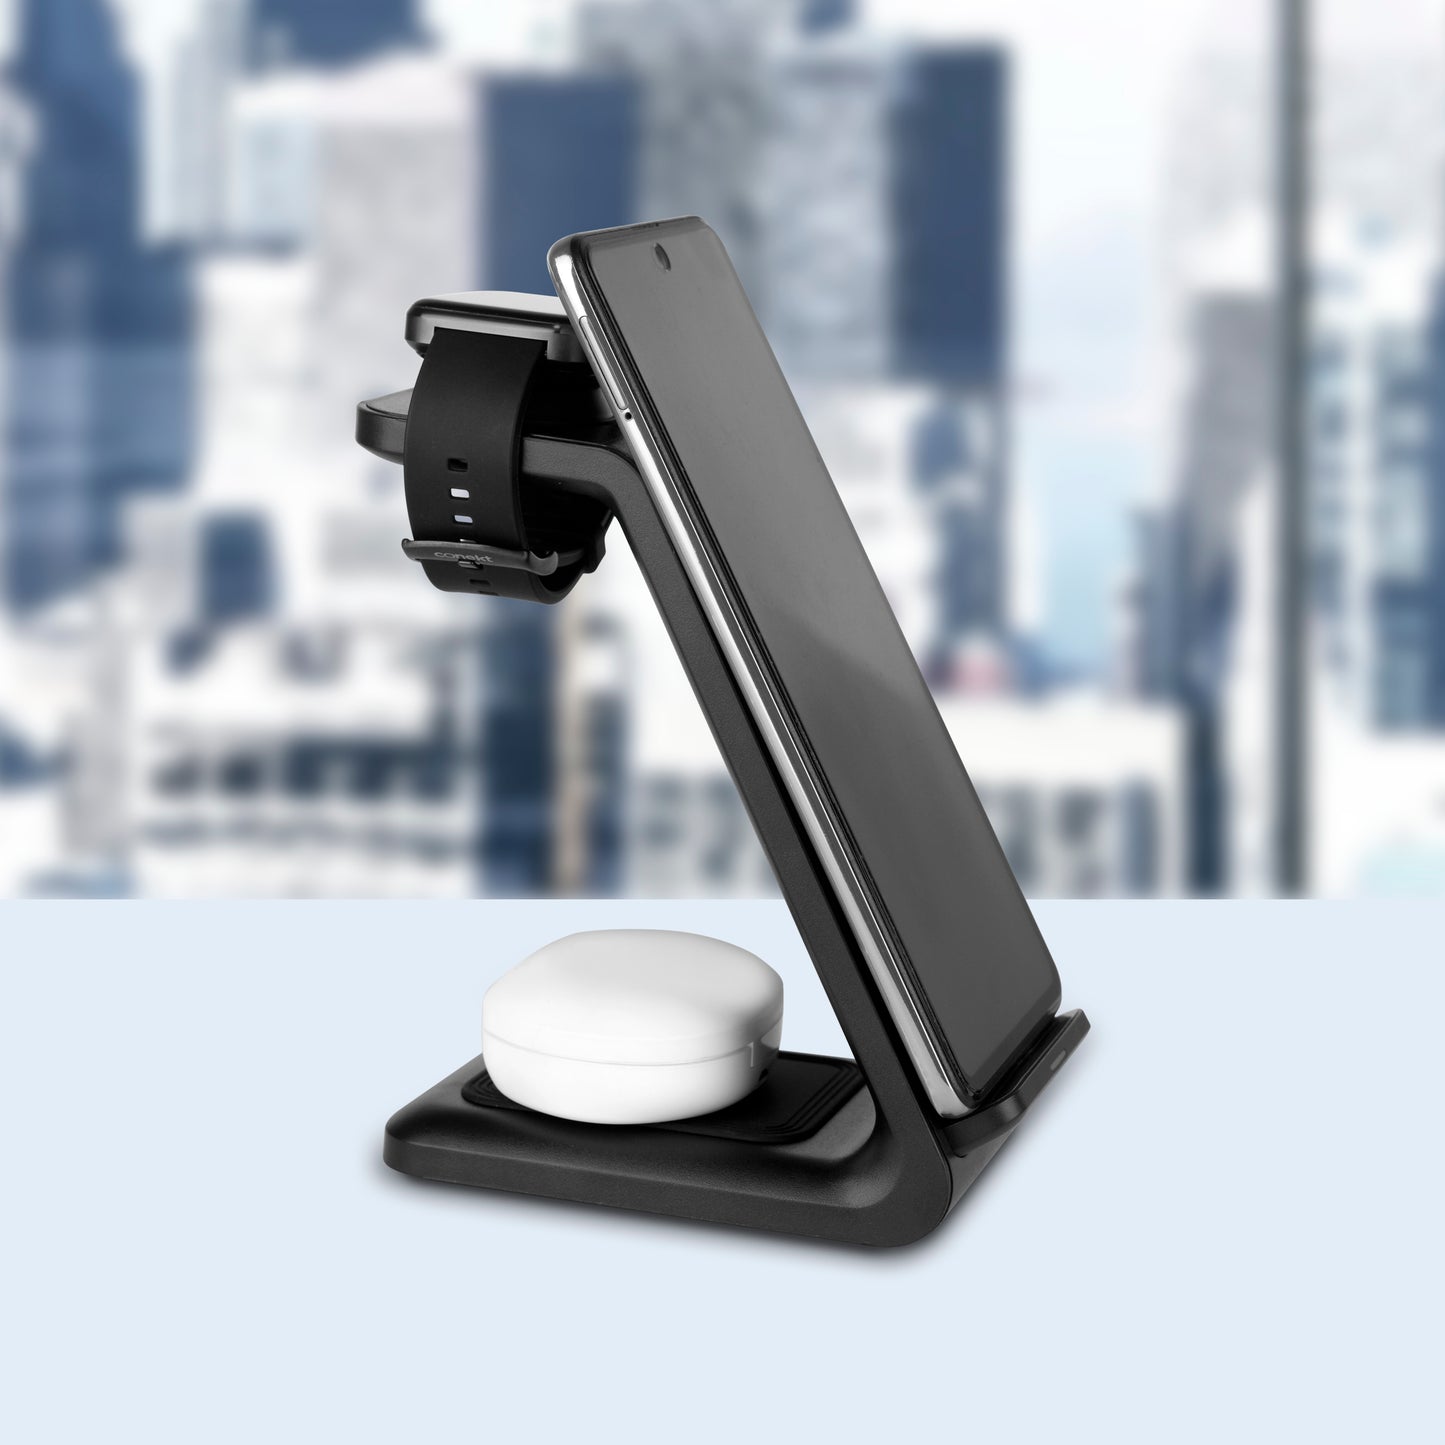 Personalized EnDock 3 in 1 wireless Charger - For Office Use, Personal Use, or Corporate Gifting HK1214